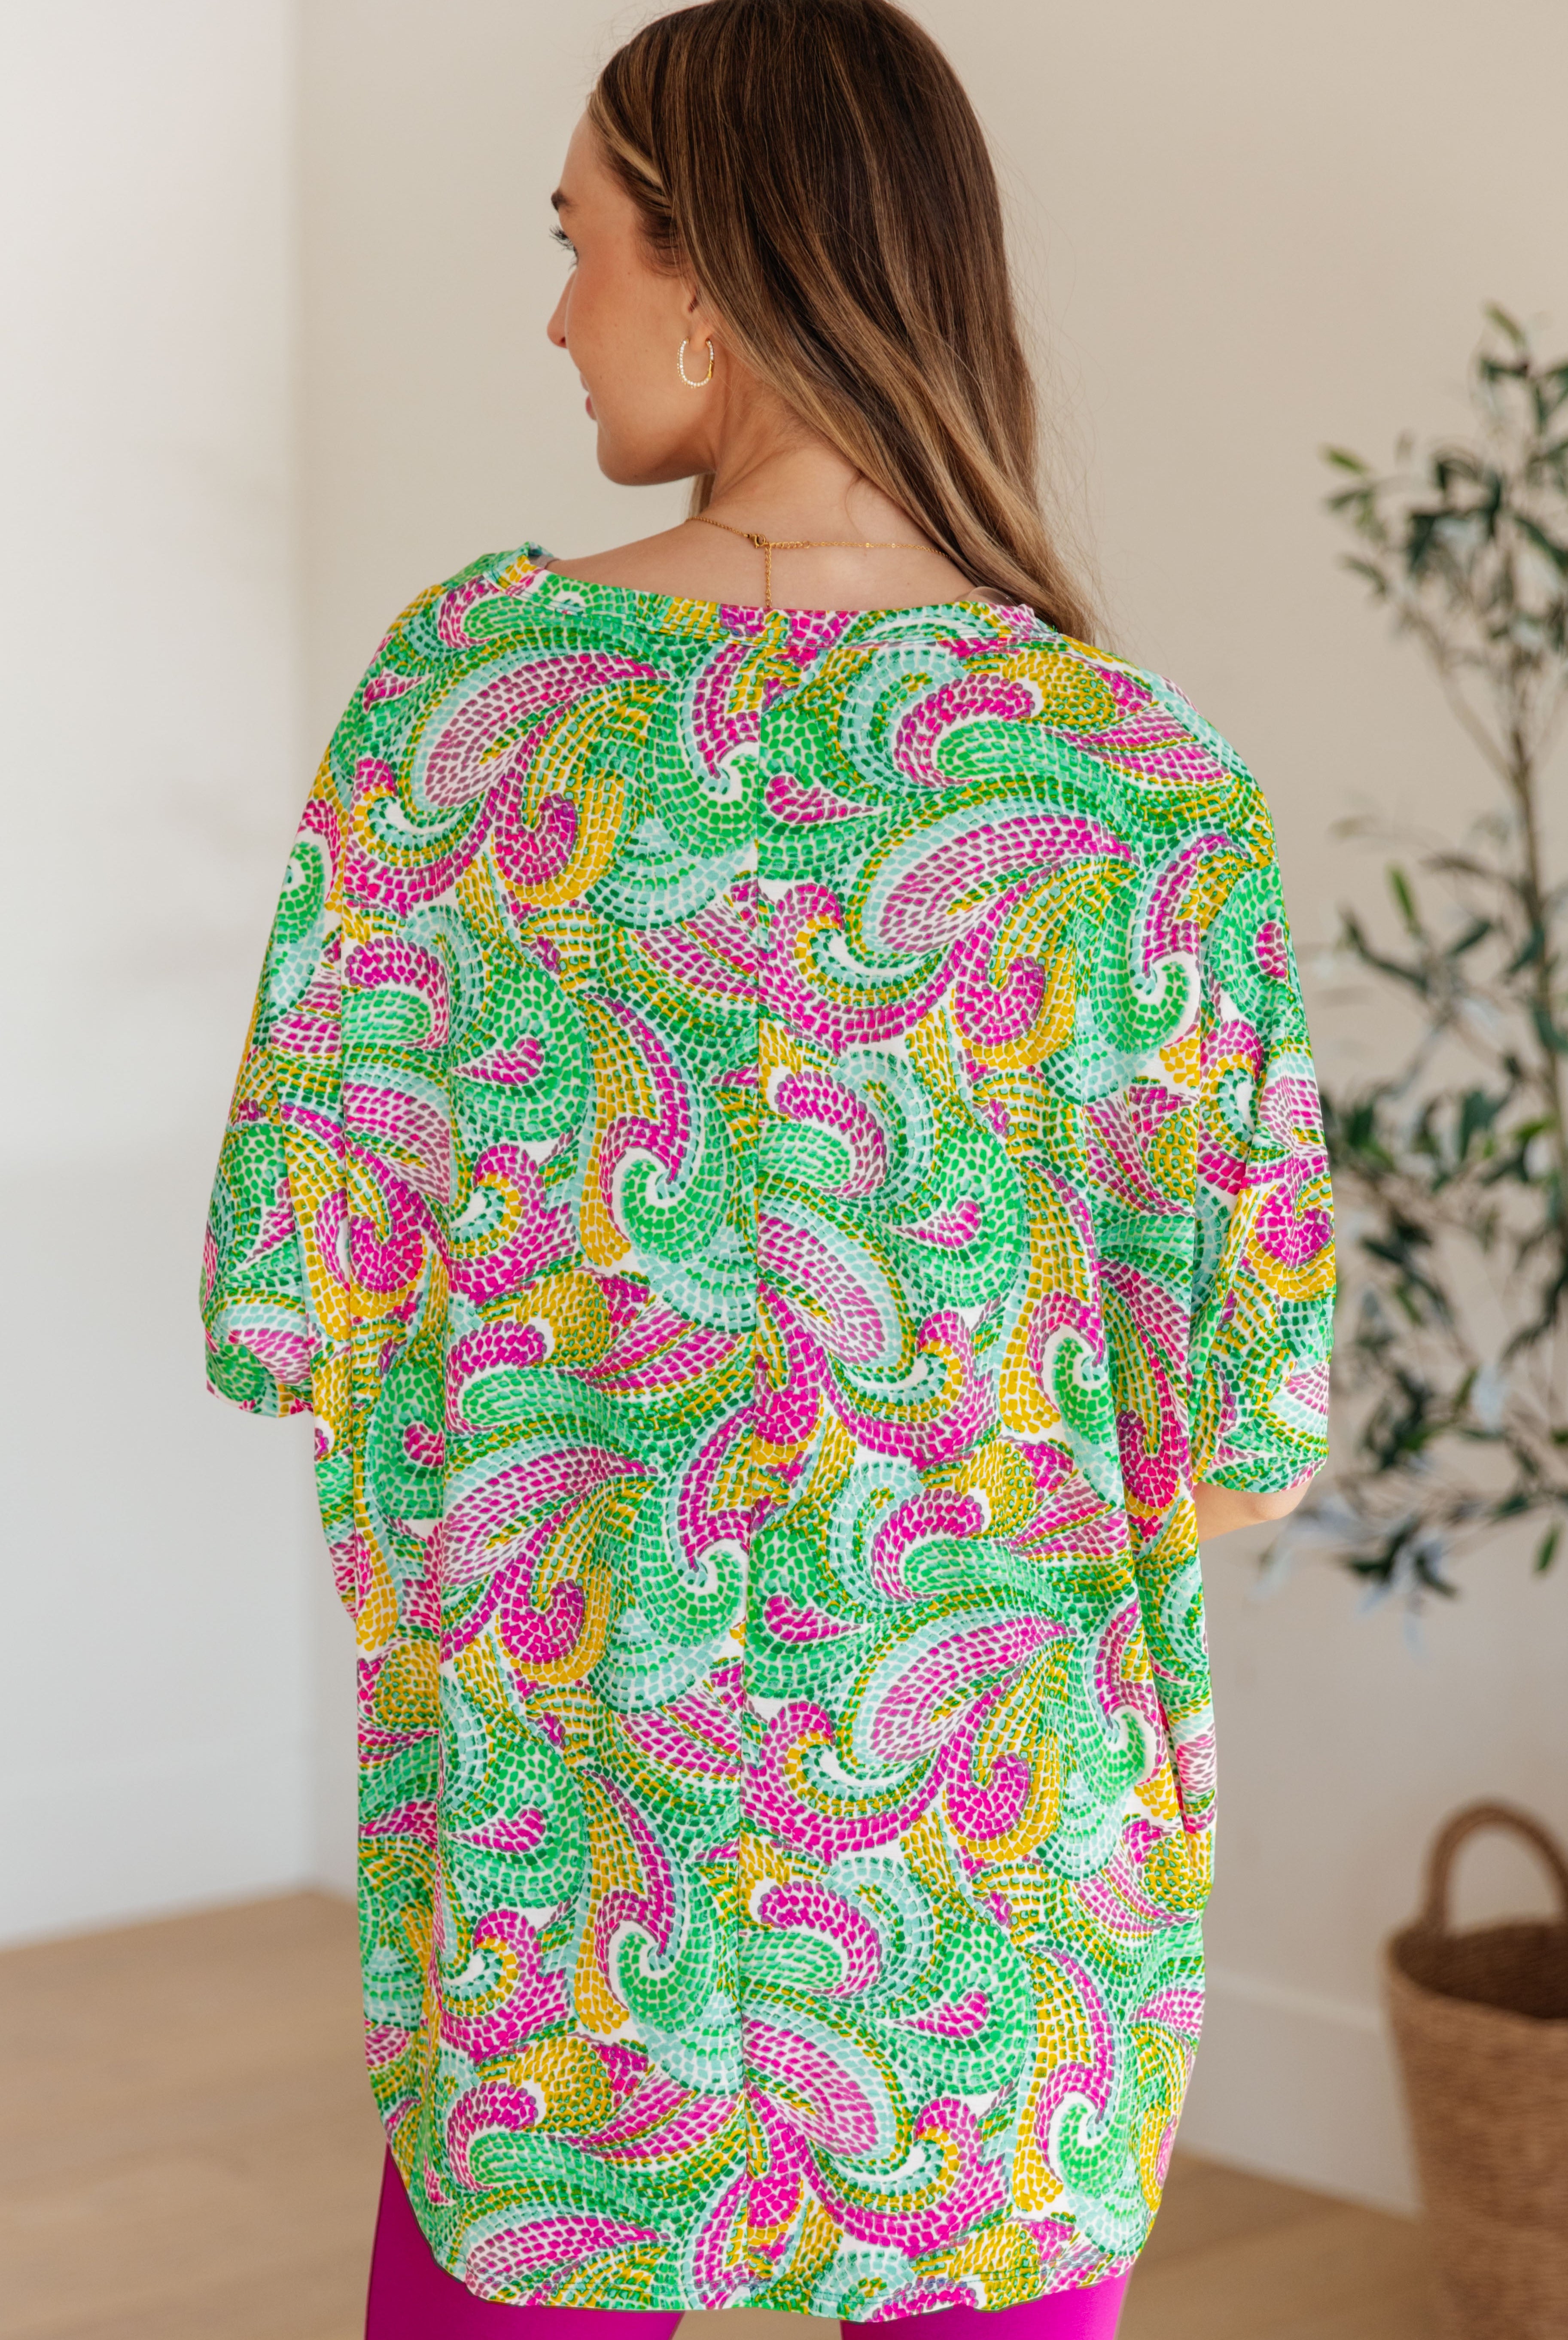 Essential Blouse in Painted Green and Pink-Womens-Ave Shops-Urban Threadz Boutique, Women's Fashion Boutique in Saugatuck, MI